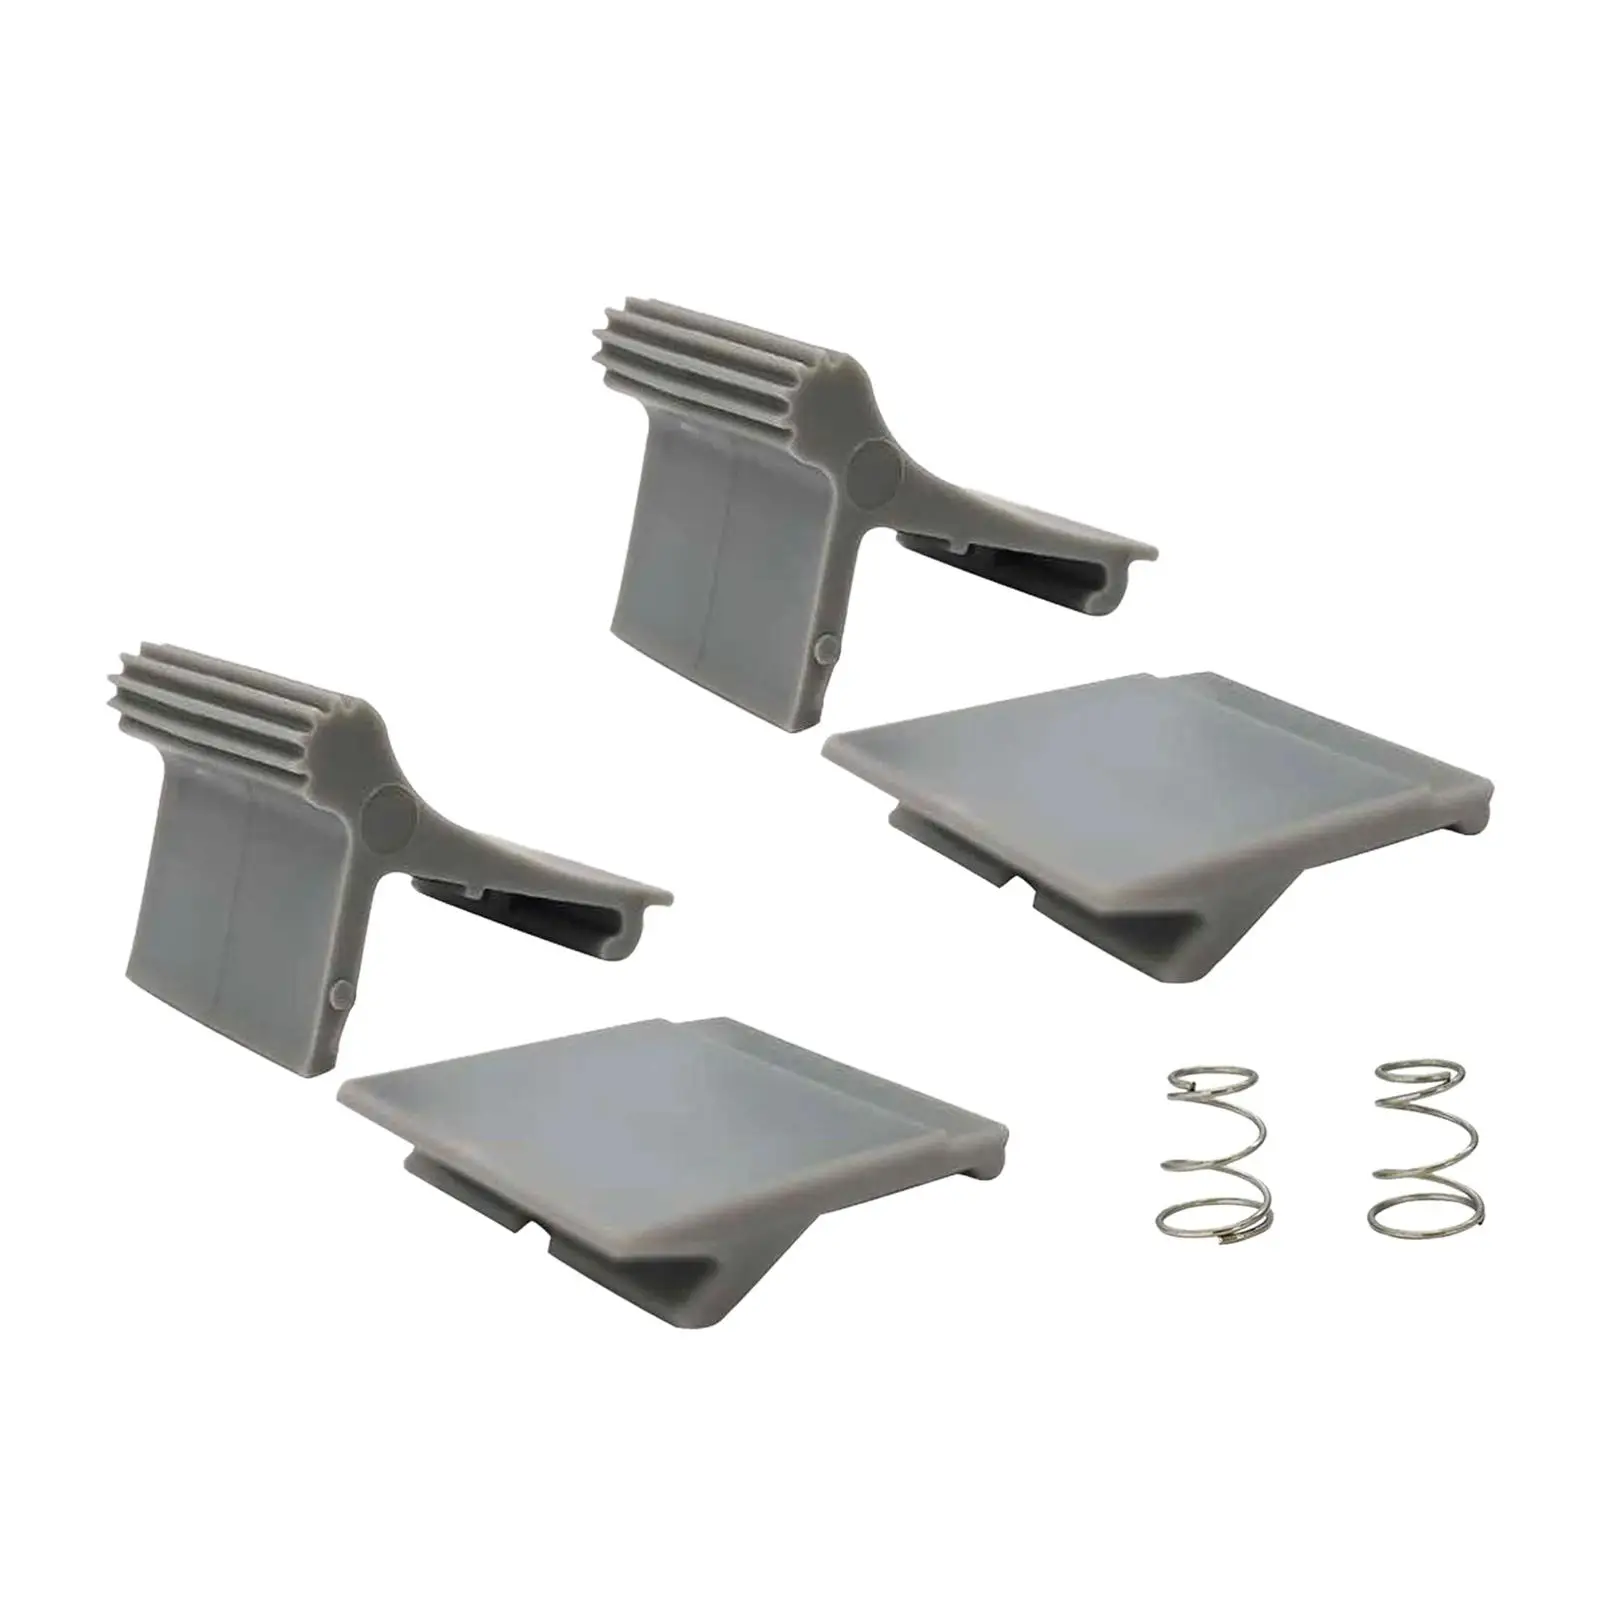 RV Awning Arm Slider Catch Set Spare Parts 4 Slider Catch Accessories Easy to Install for RV Trailer Motorhome